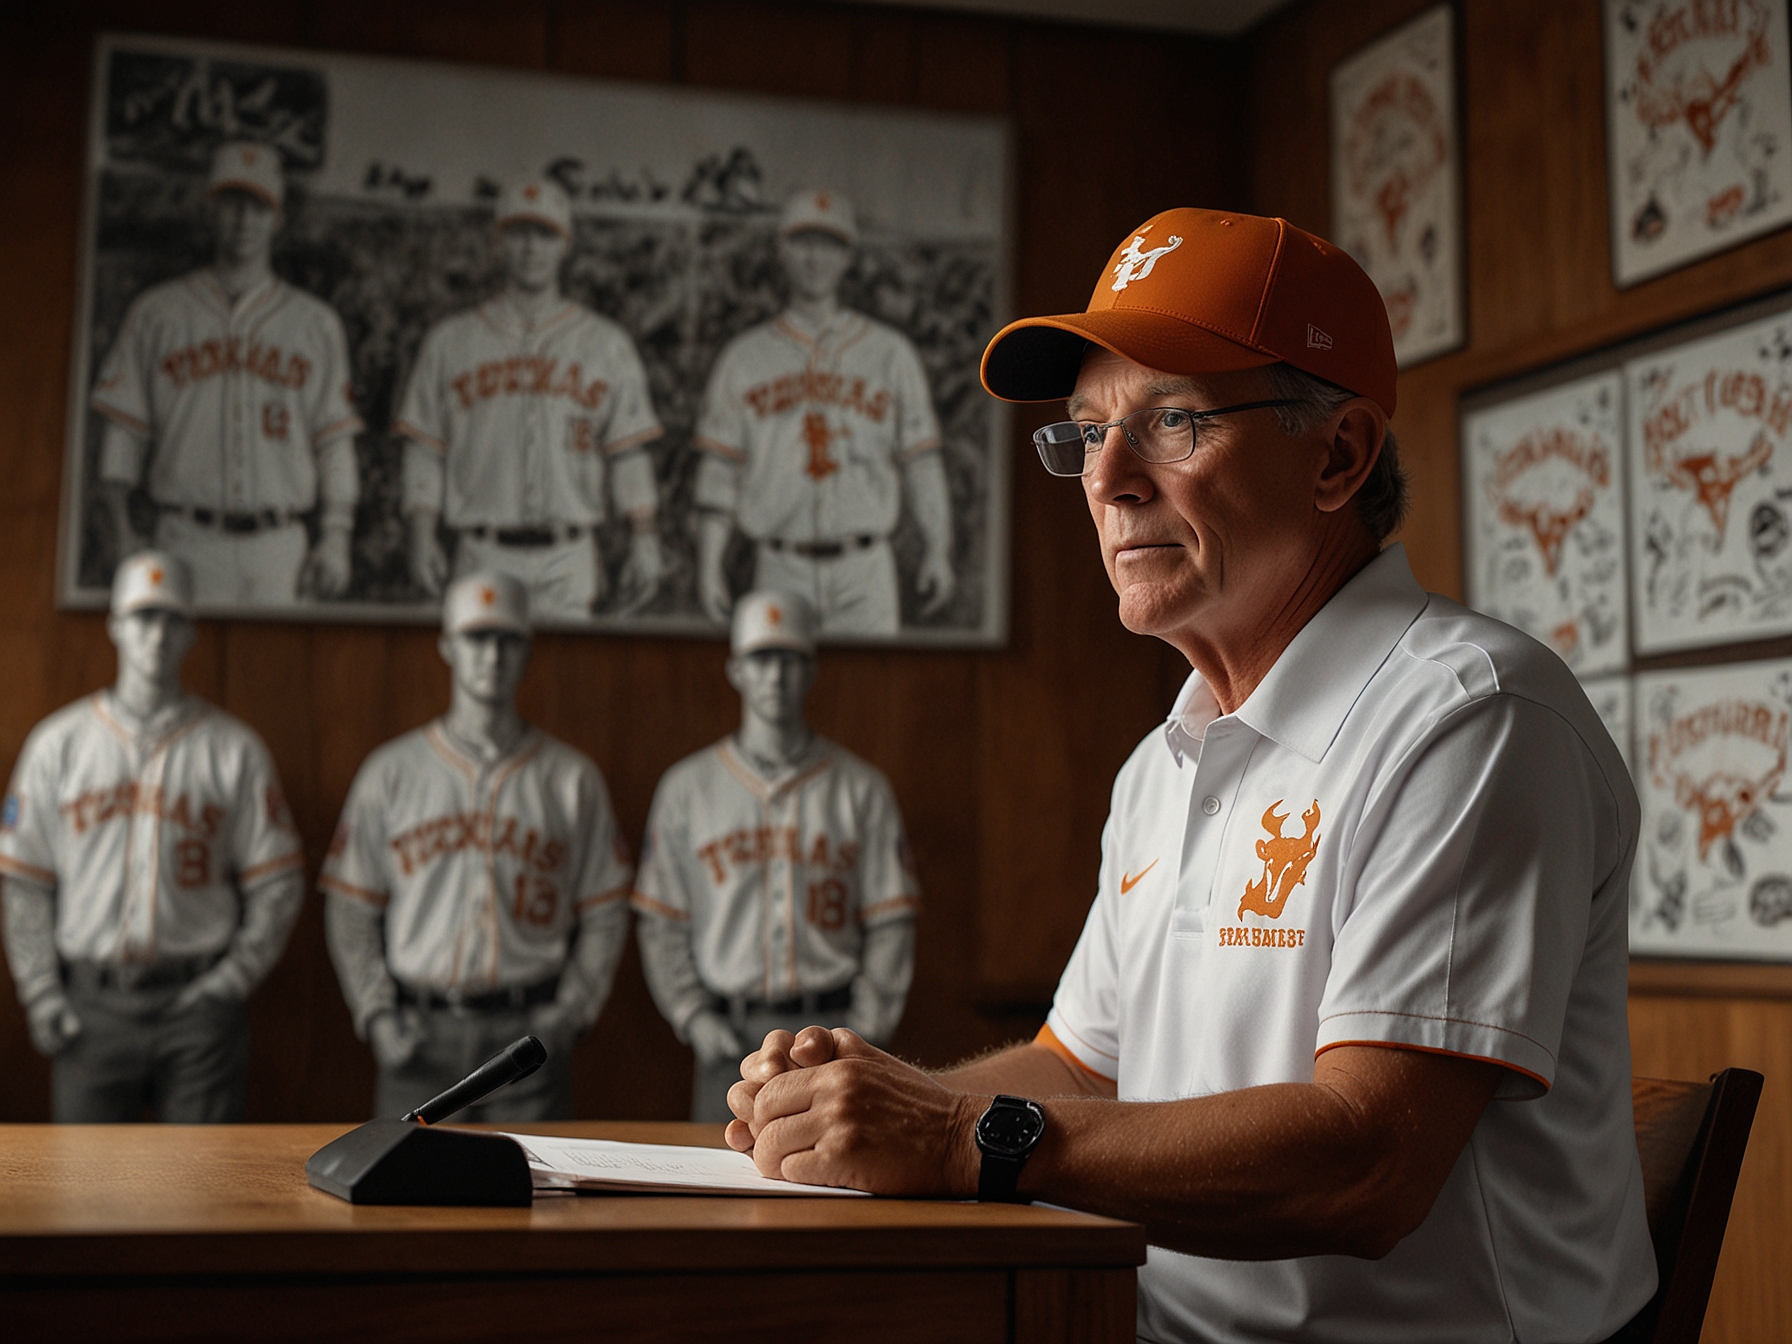 Jim Schlossnagle, in Texas baseball gear, addresses a press conference outlining his vision to transform Texas Longhorns into SEC competitors, emphasizing player development and tradition.